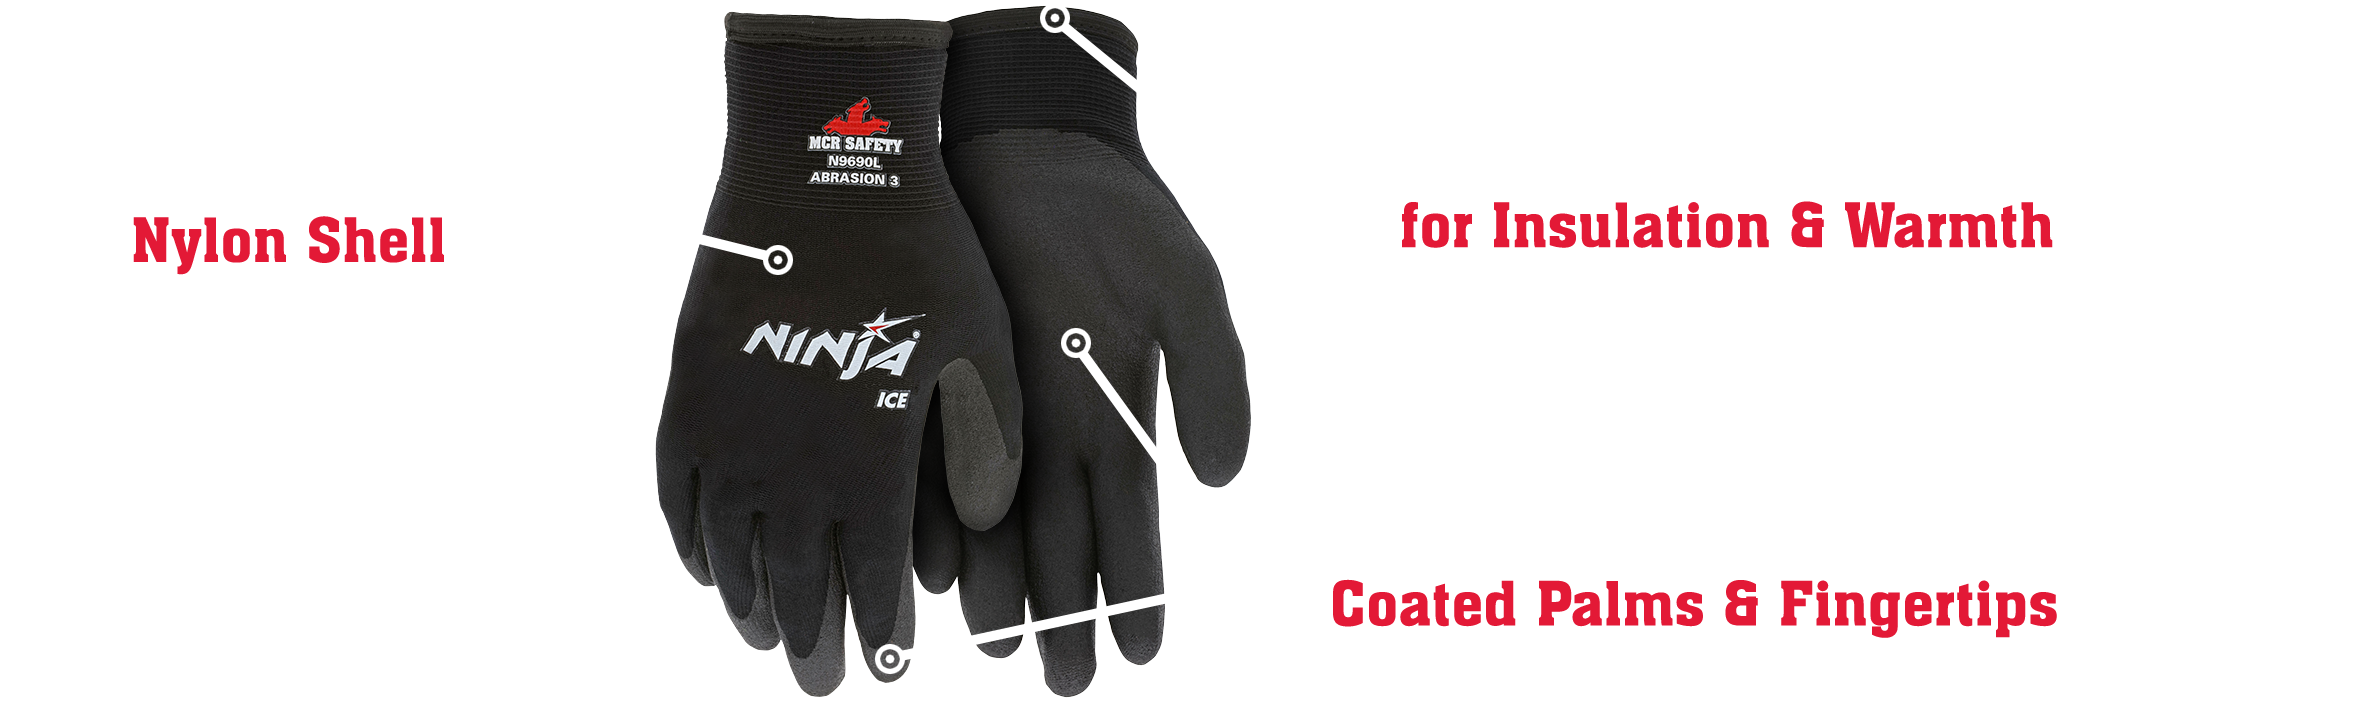 https://www.mcrsafety.com/~/media/mcrsafety/technology/gloves/ninja/n9690_with_callouts.png?h=339.25&w=1030.5&hash=BF2A49250ADA8BF9F9753B732FEE5593